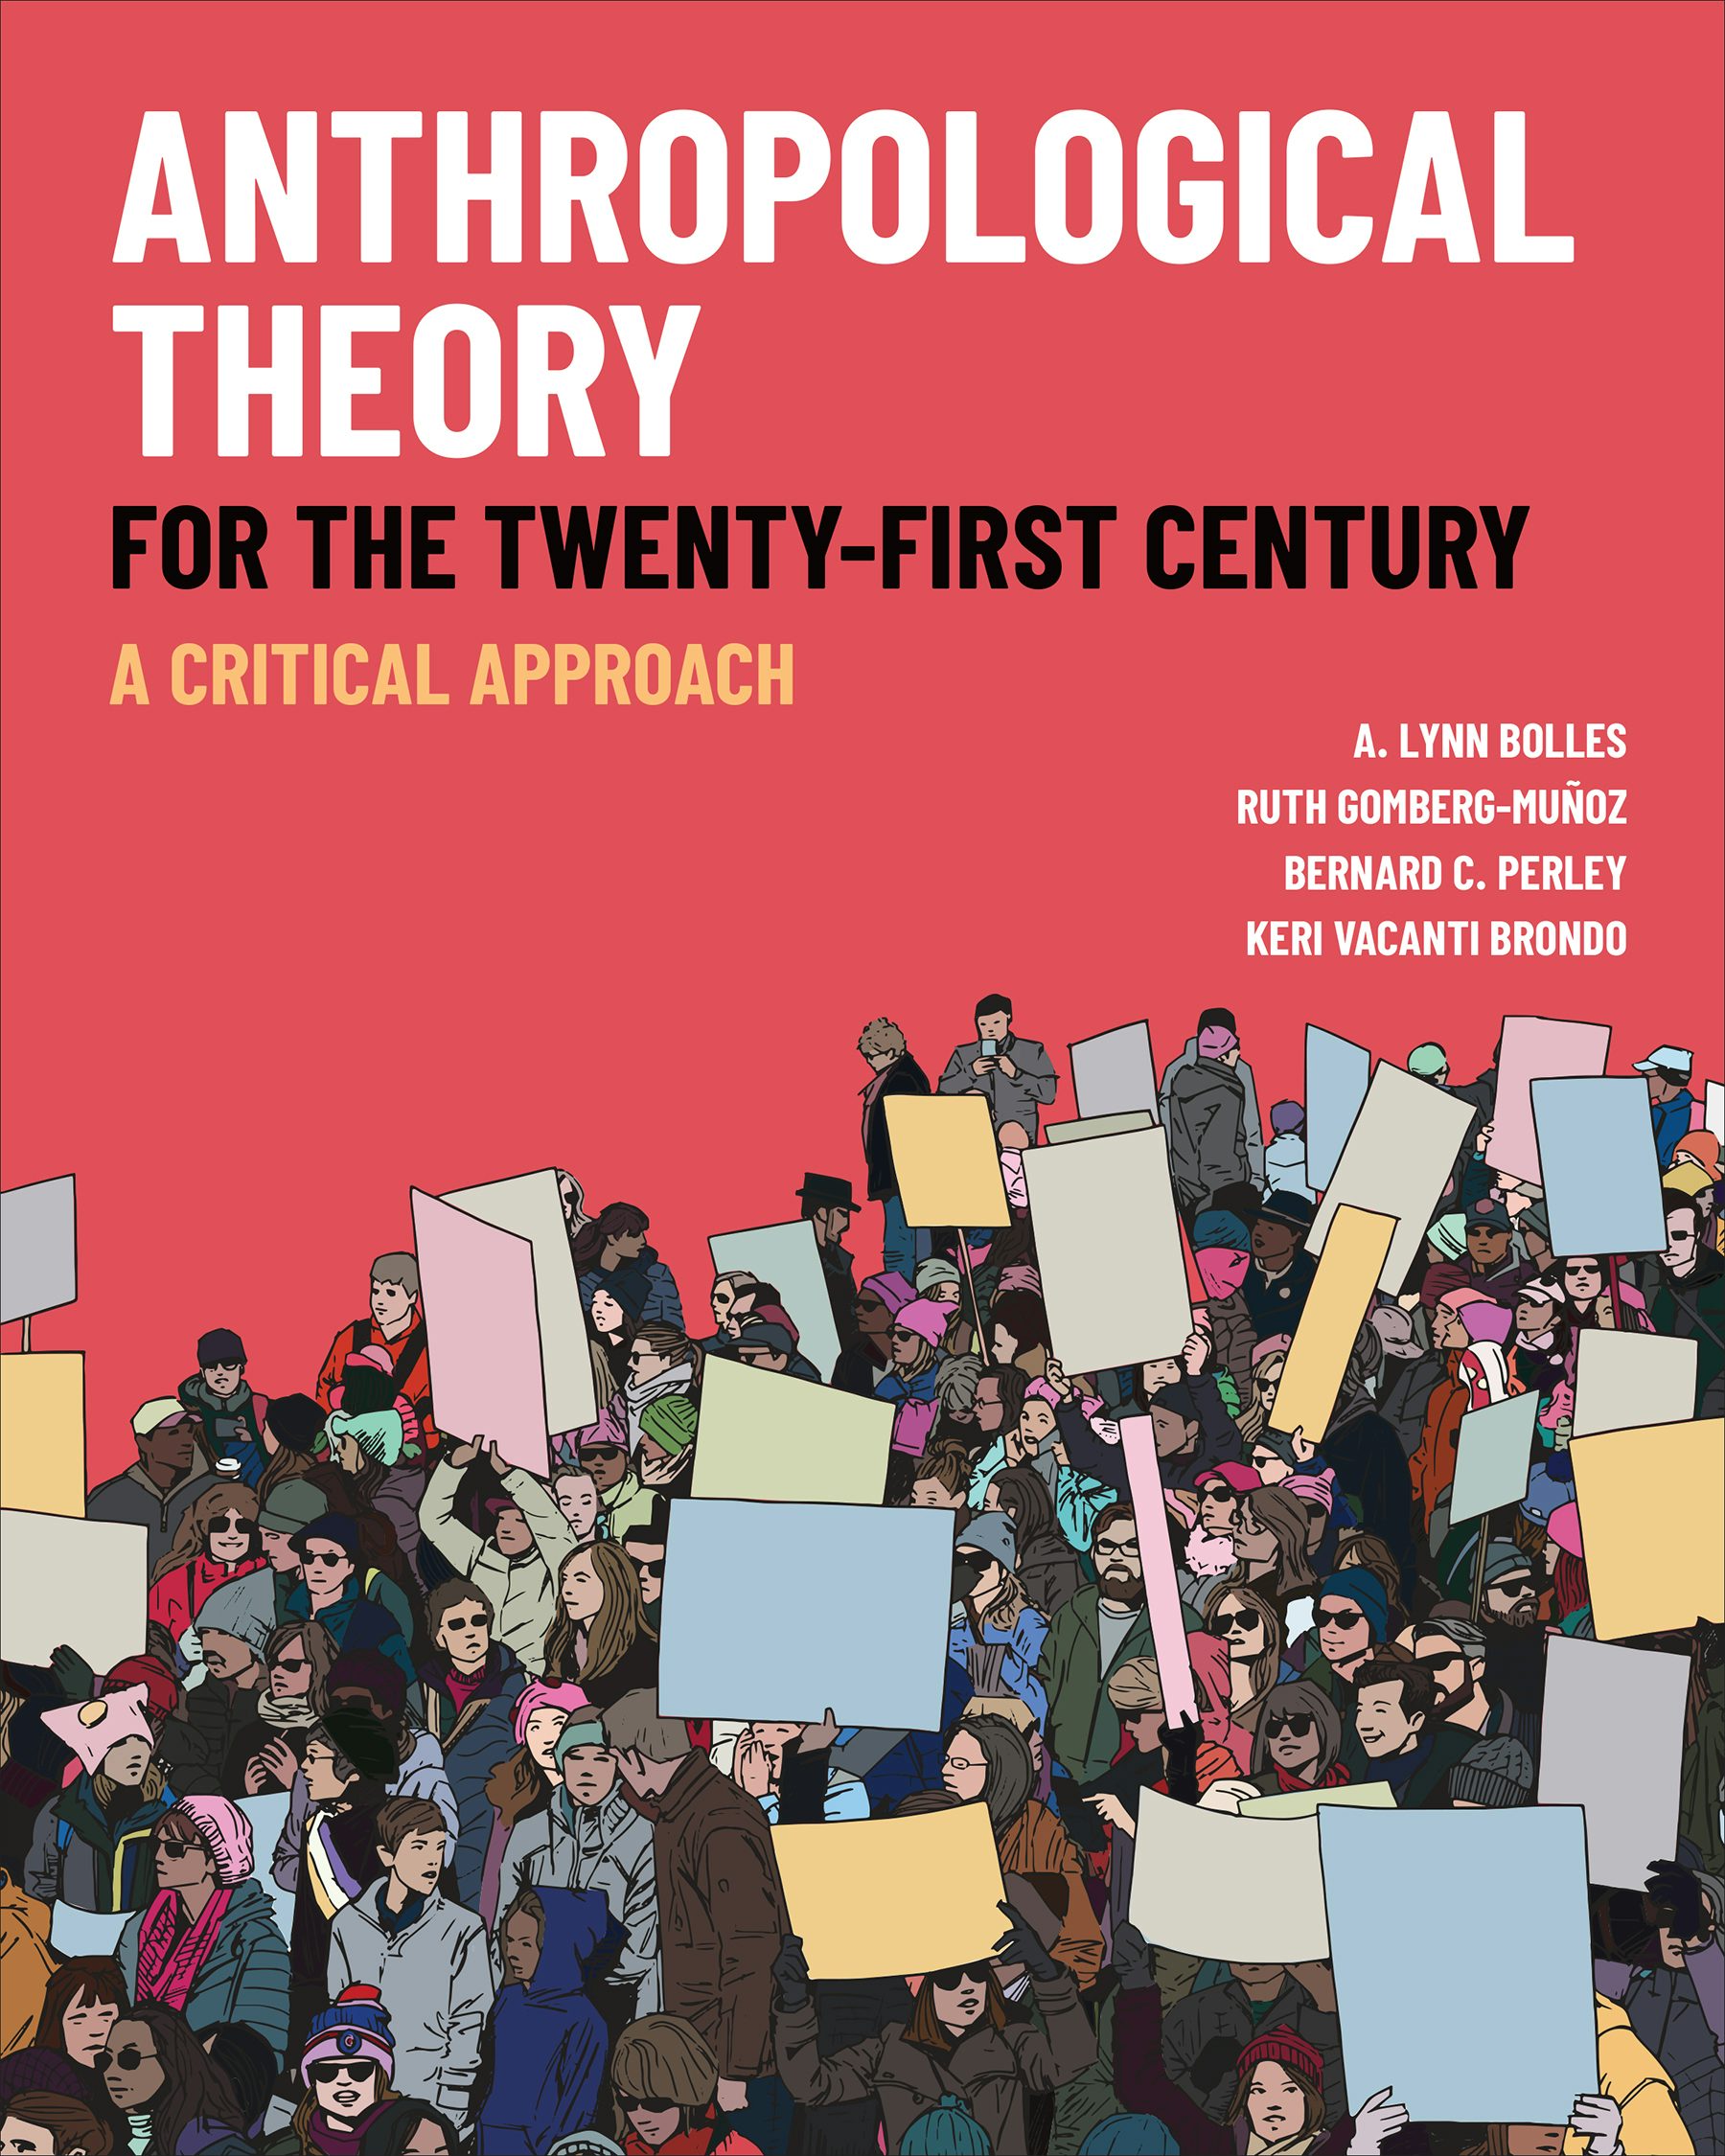 University of Toronto Press - Anthropological Theory for the